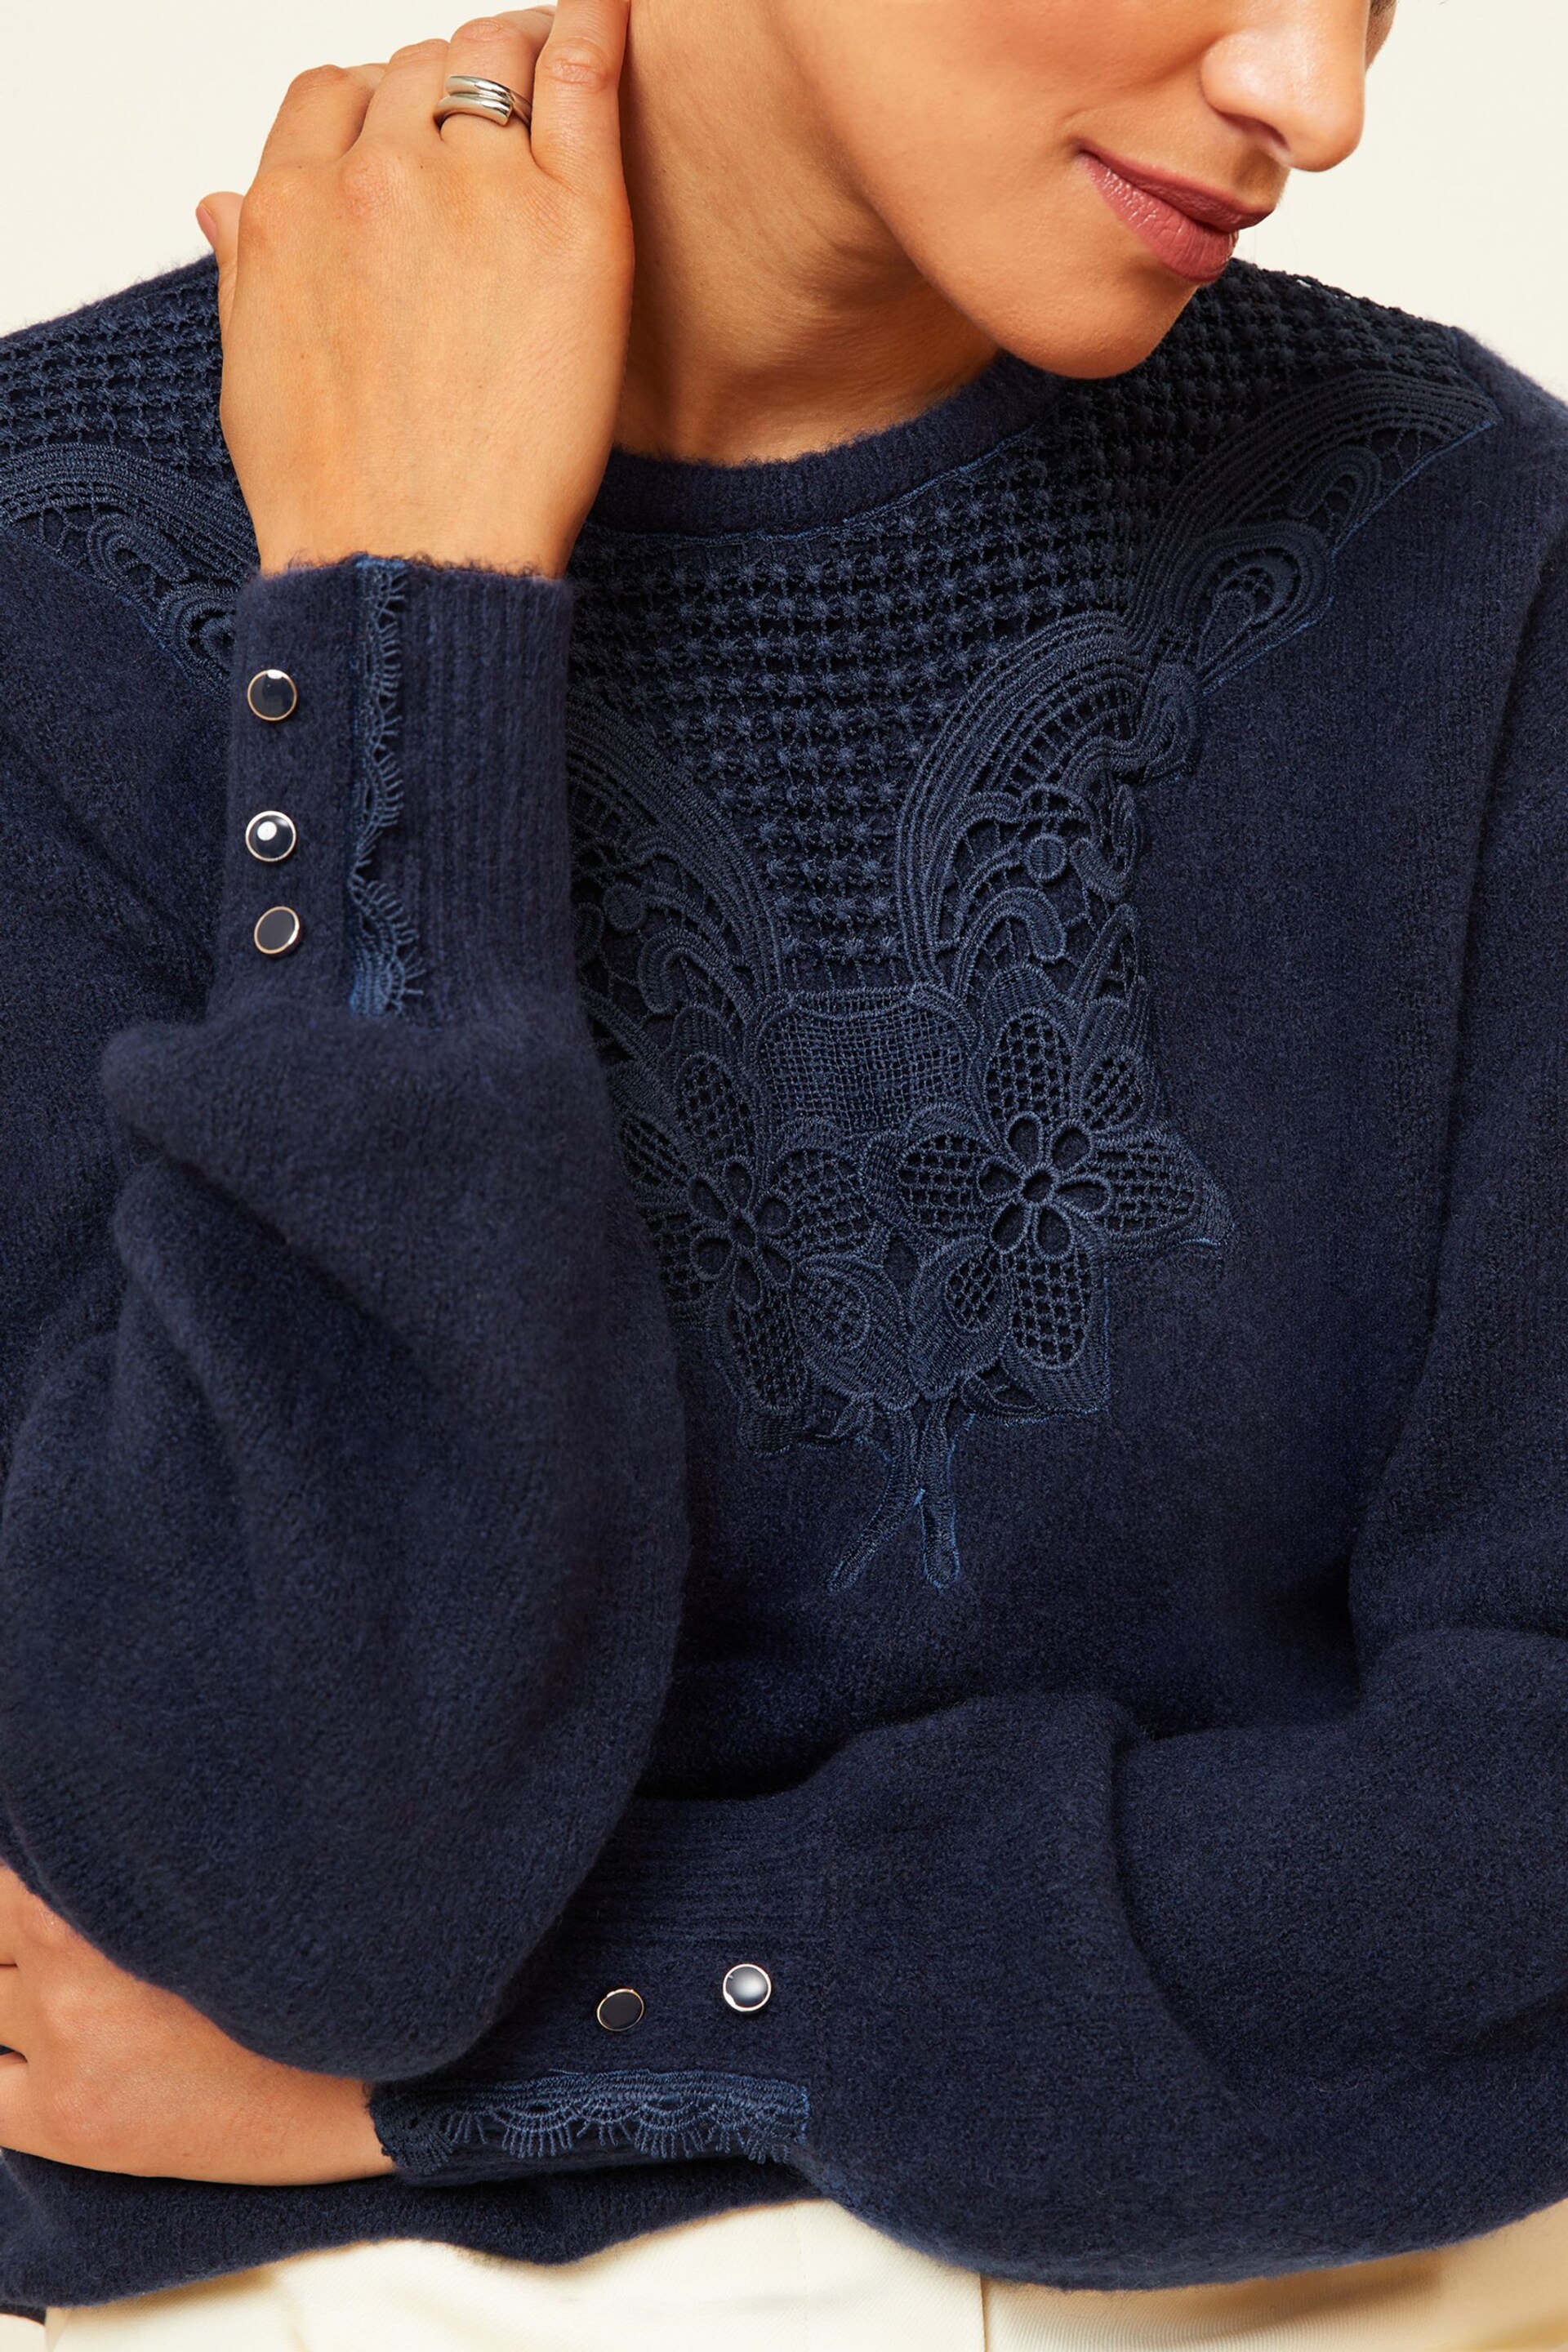 Love & Roses Navy Blue Lace Insert Crew Neck Jumper - Image 2 of 4